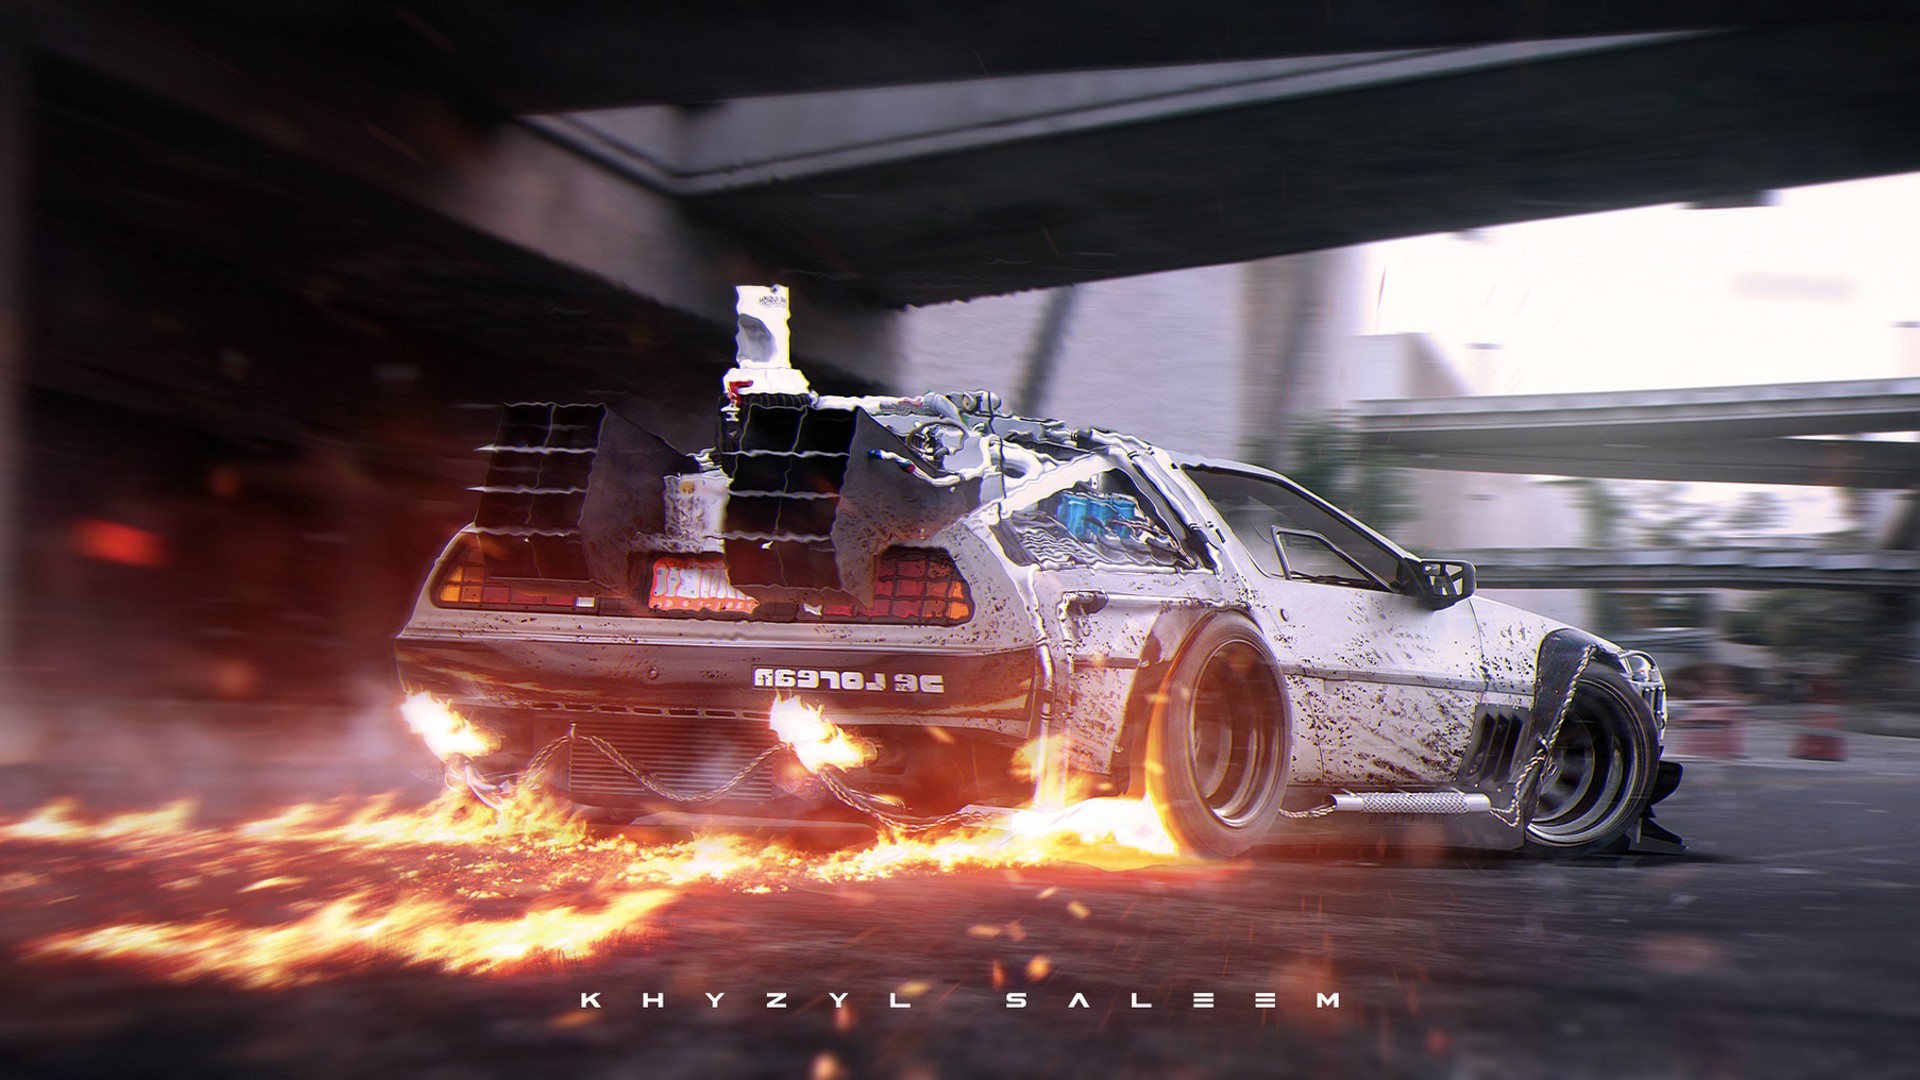 Back To The Future DeLorean Supercars Time Travel Khyzyl Saleem 1920x1080